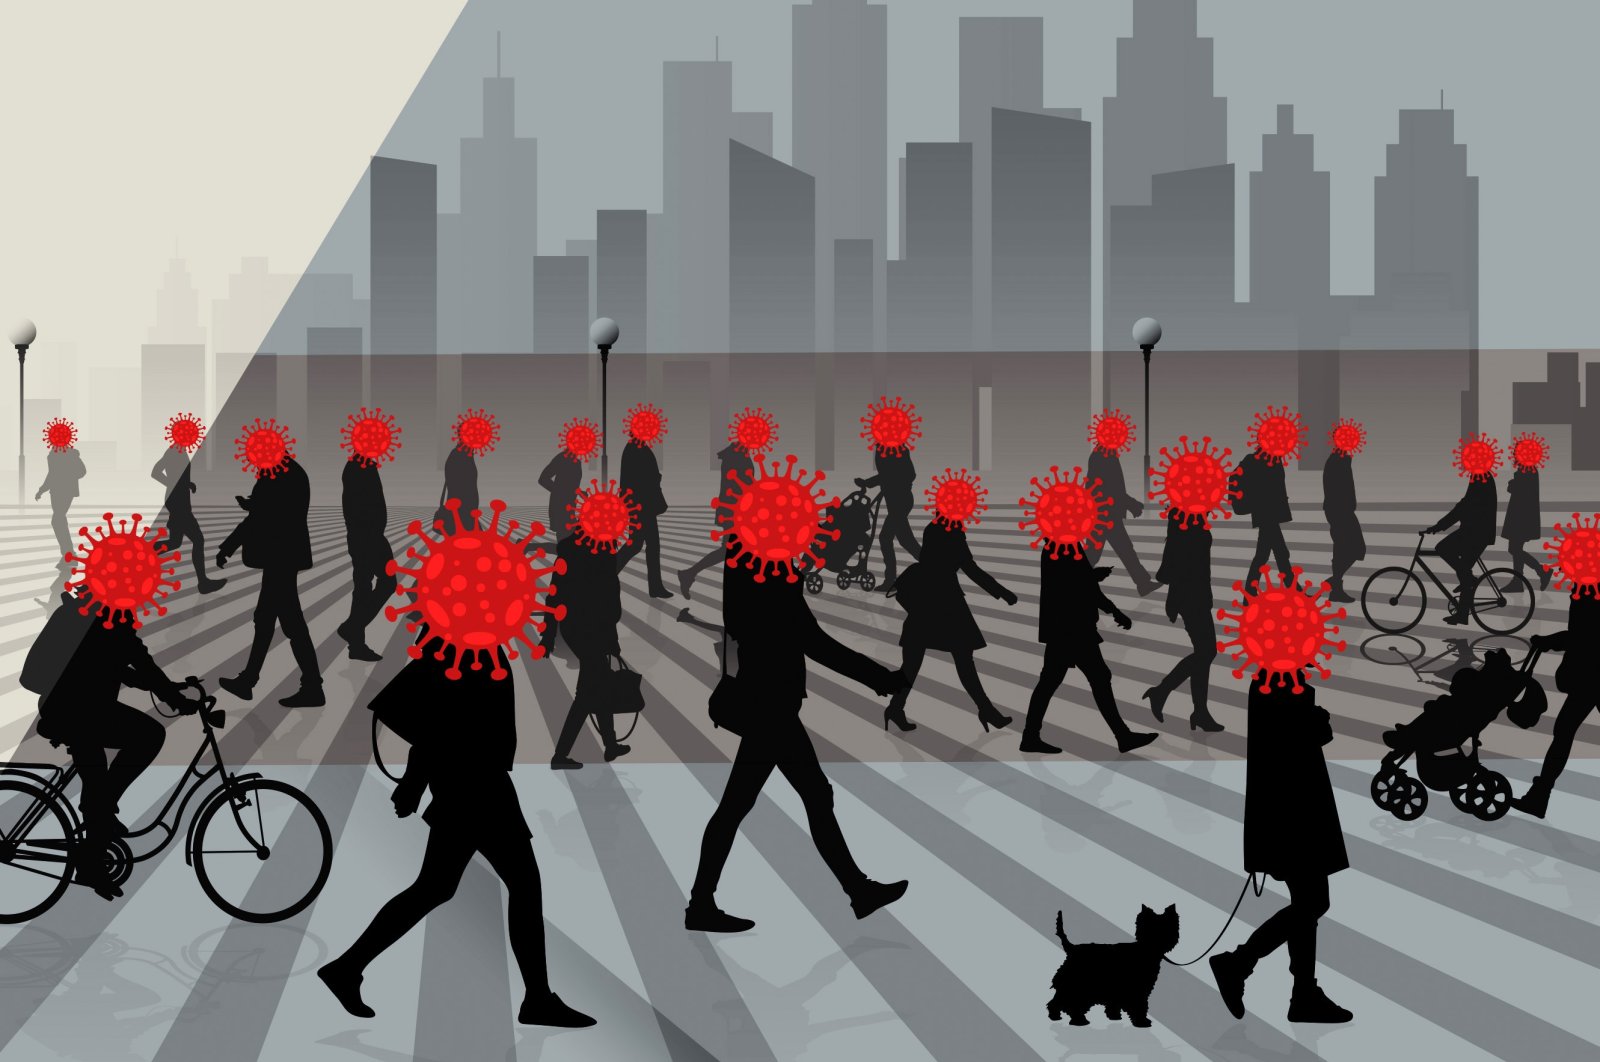 A photo illustration by Daily Sabah&#039;s Büşra Öztürk makes reference to the spread of the new coronavirus variant, omicron, throughout societies.